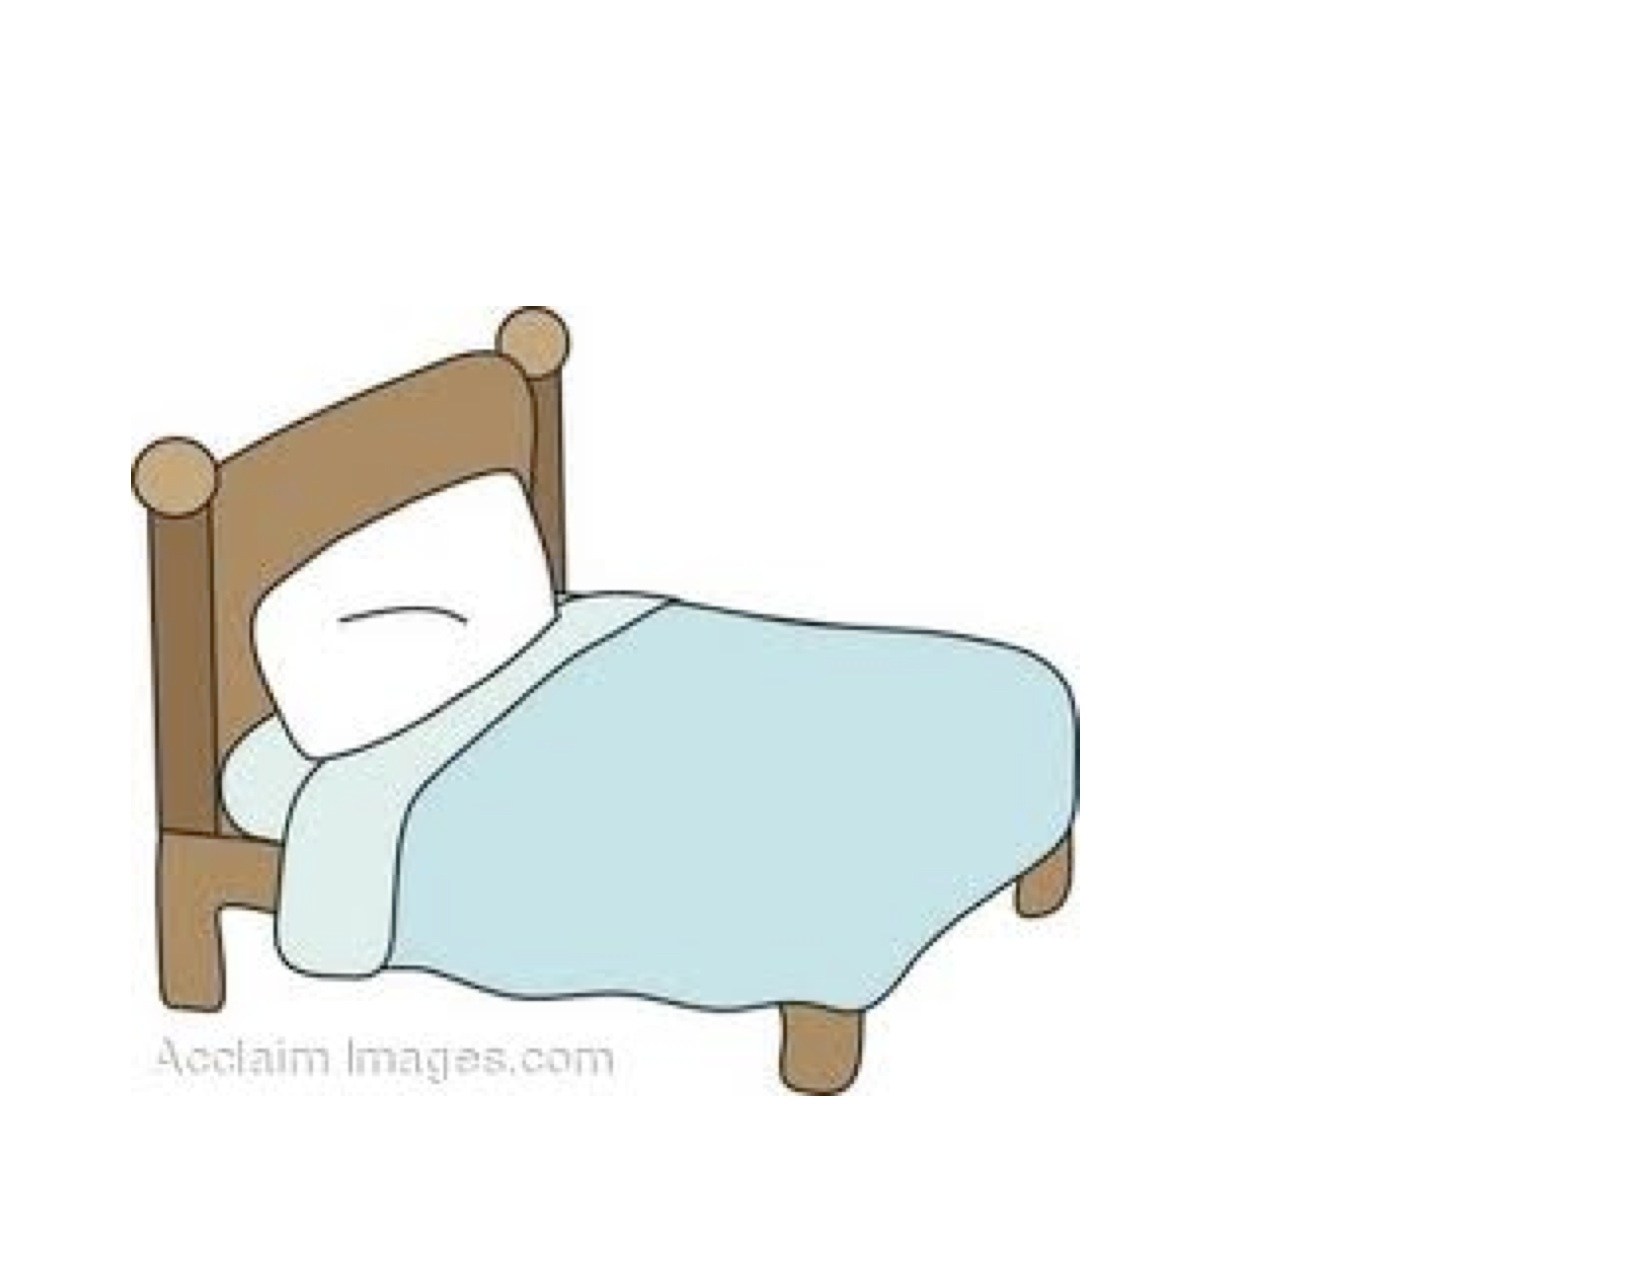 Bed clipart cute.